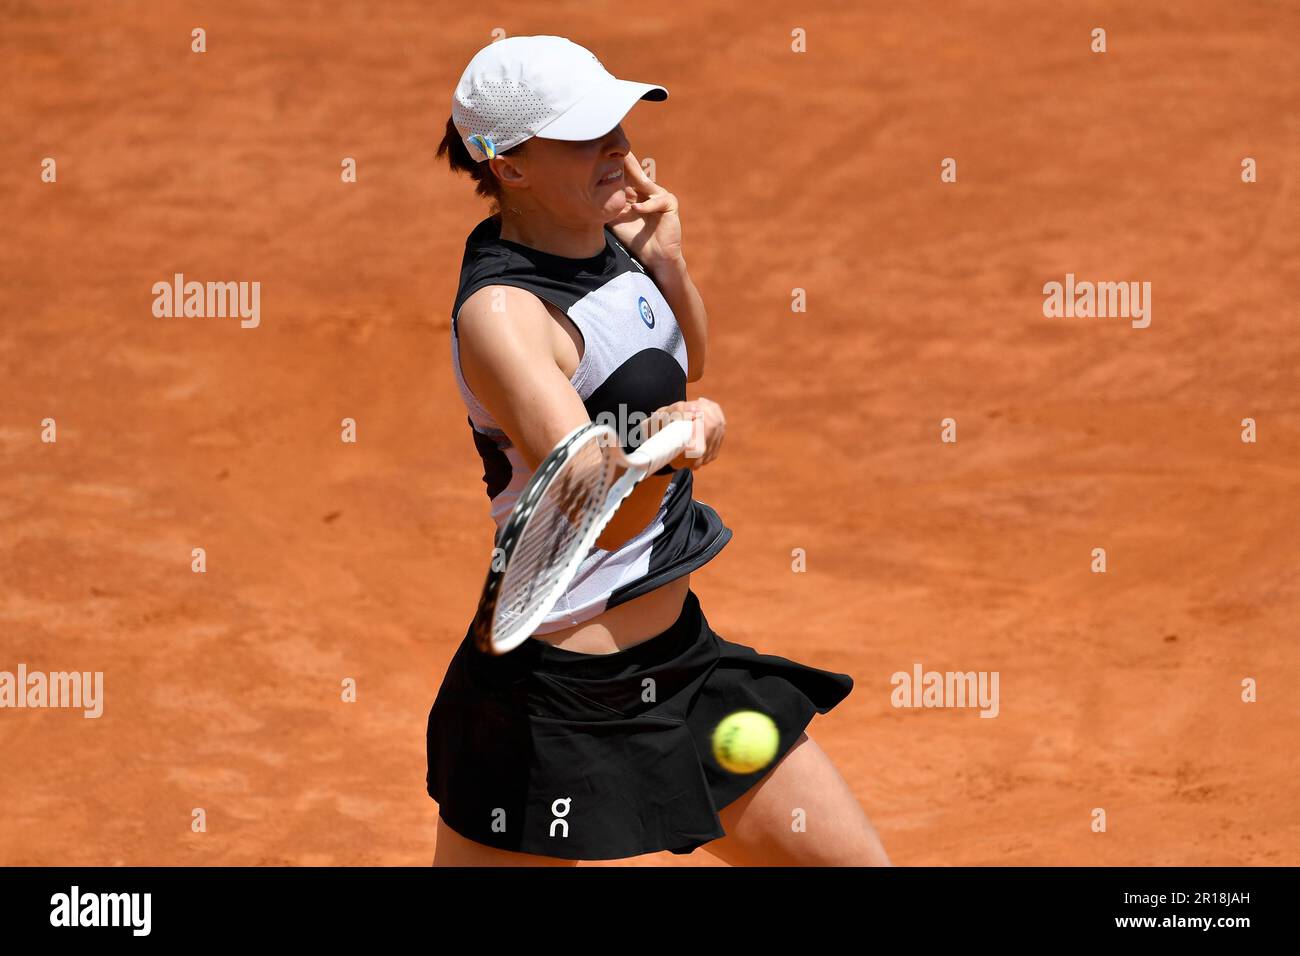 Rome, Italy. 12th May, 2023. Iga Swiatek of Poland during her match against Anastasia Pavlyuchenkova of Russia at the Internazionali BNL d'Italia tennis tournament at Foro Italico in Rome, Italy on May 11th, 2023. Credit: Insidefoto di andrea staccioli/Alamy Live News Stock Photo